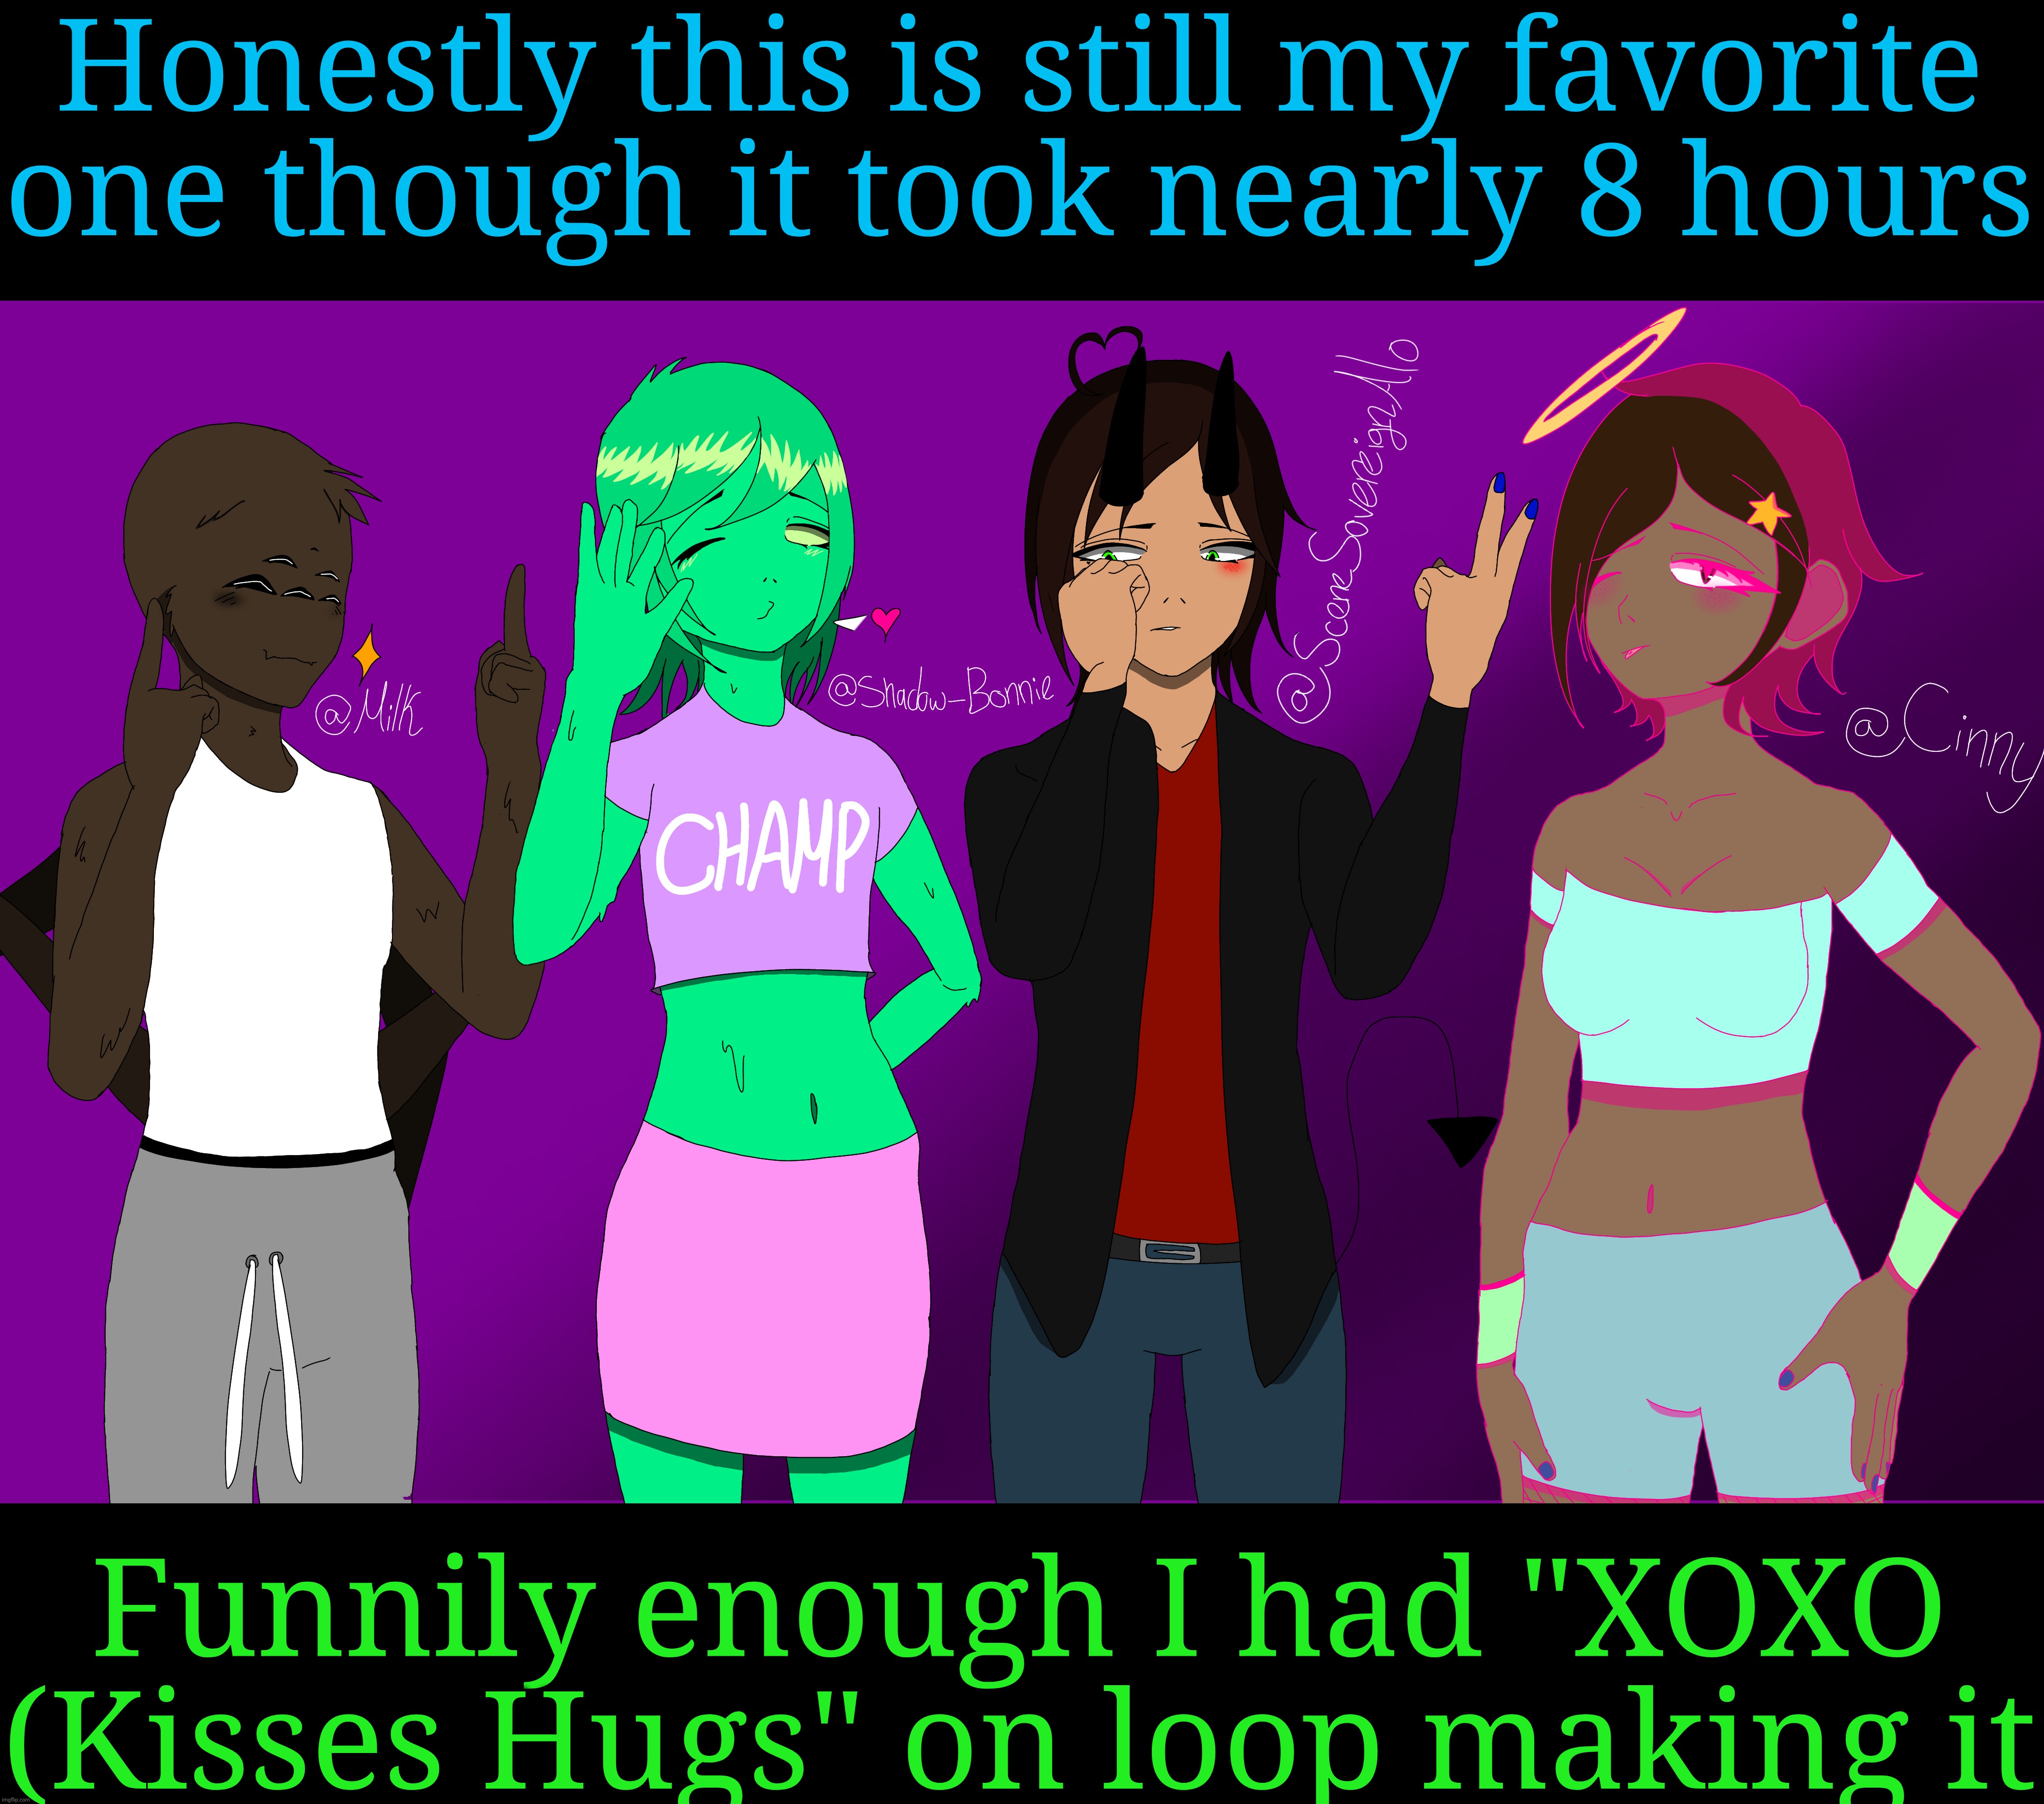 Honestly this is still my favorite one though it took nearly 8 hours; Funnily enough I had "XOXO (Kisses Hugs" on loop making it | made w/ Imgflip meme maker